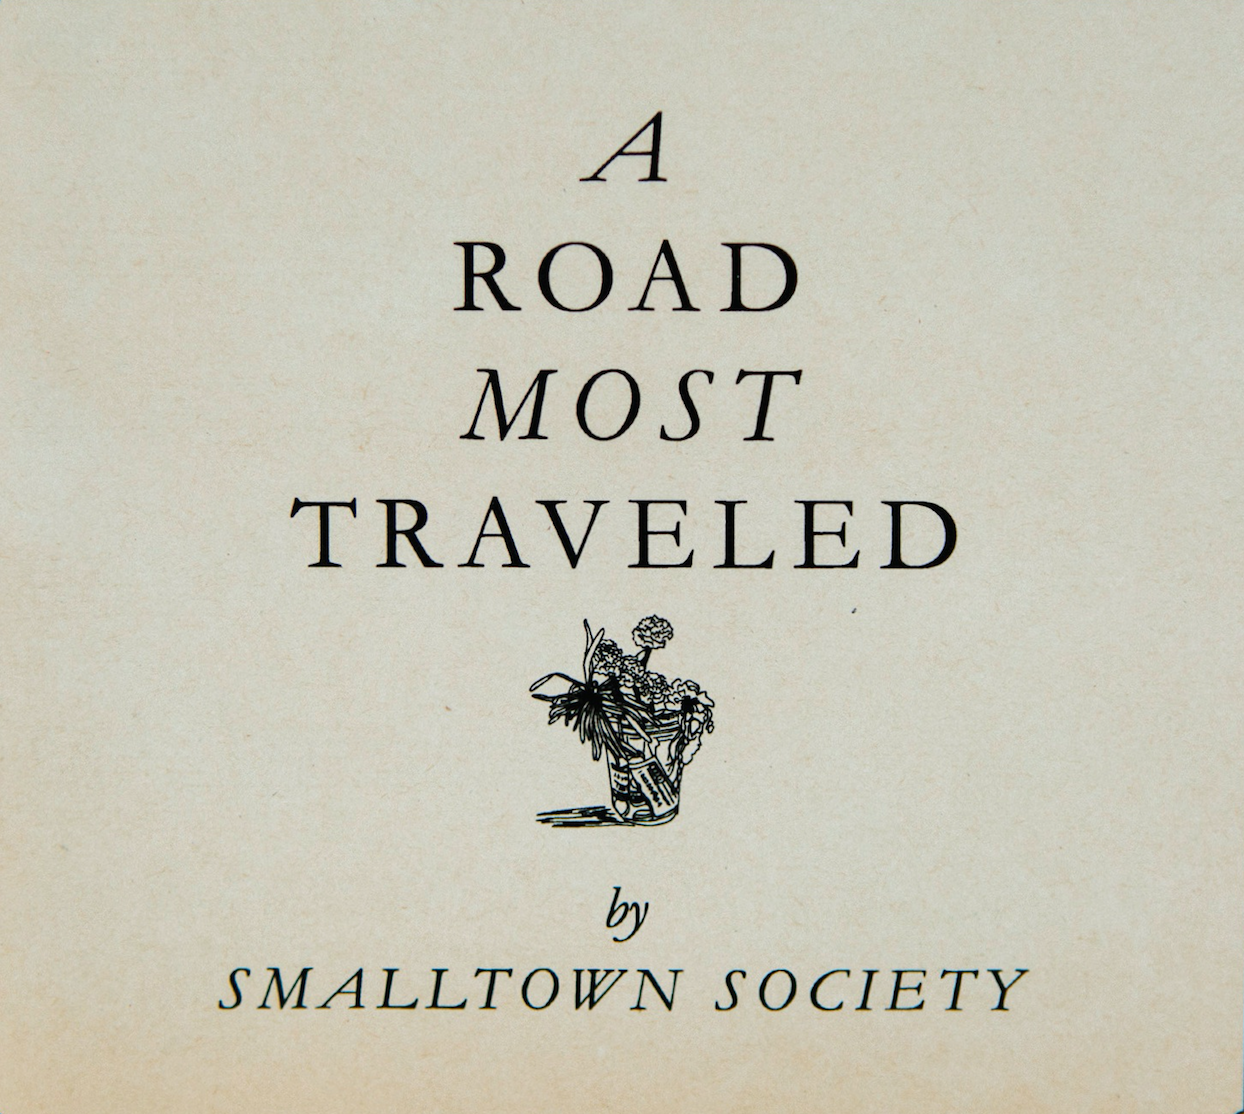 Smalltown Society - A Road Most Traveled (Copy)